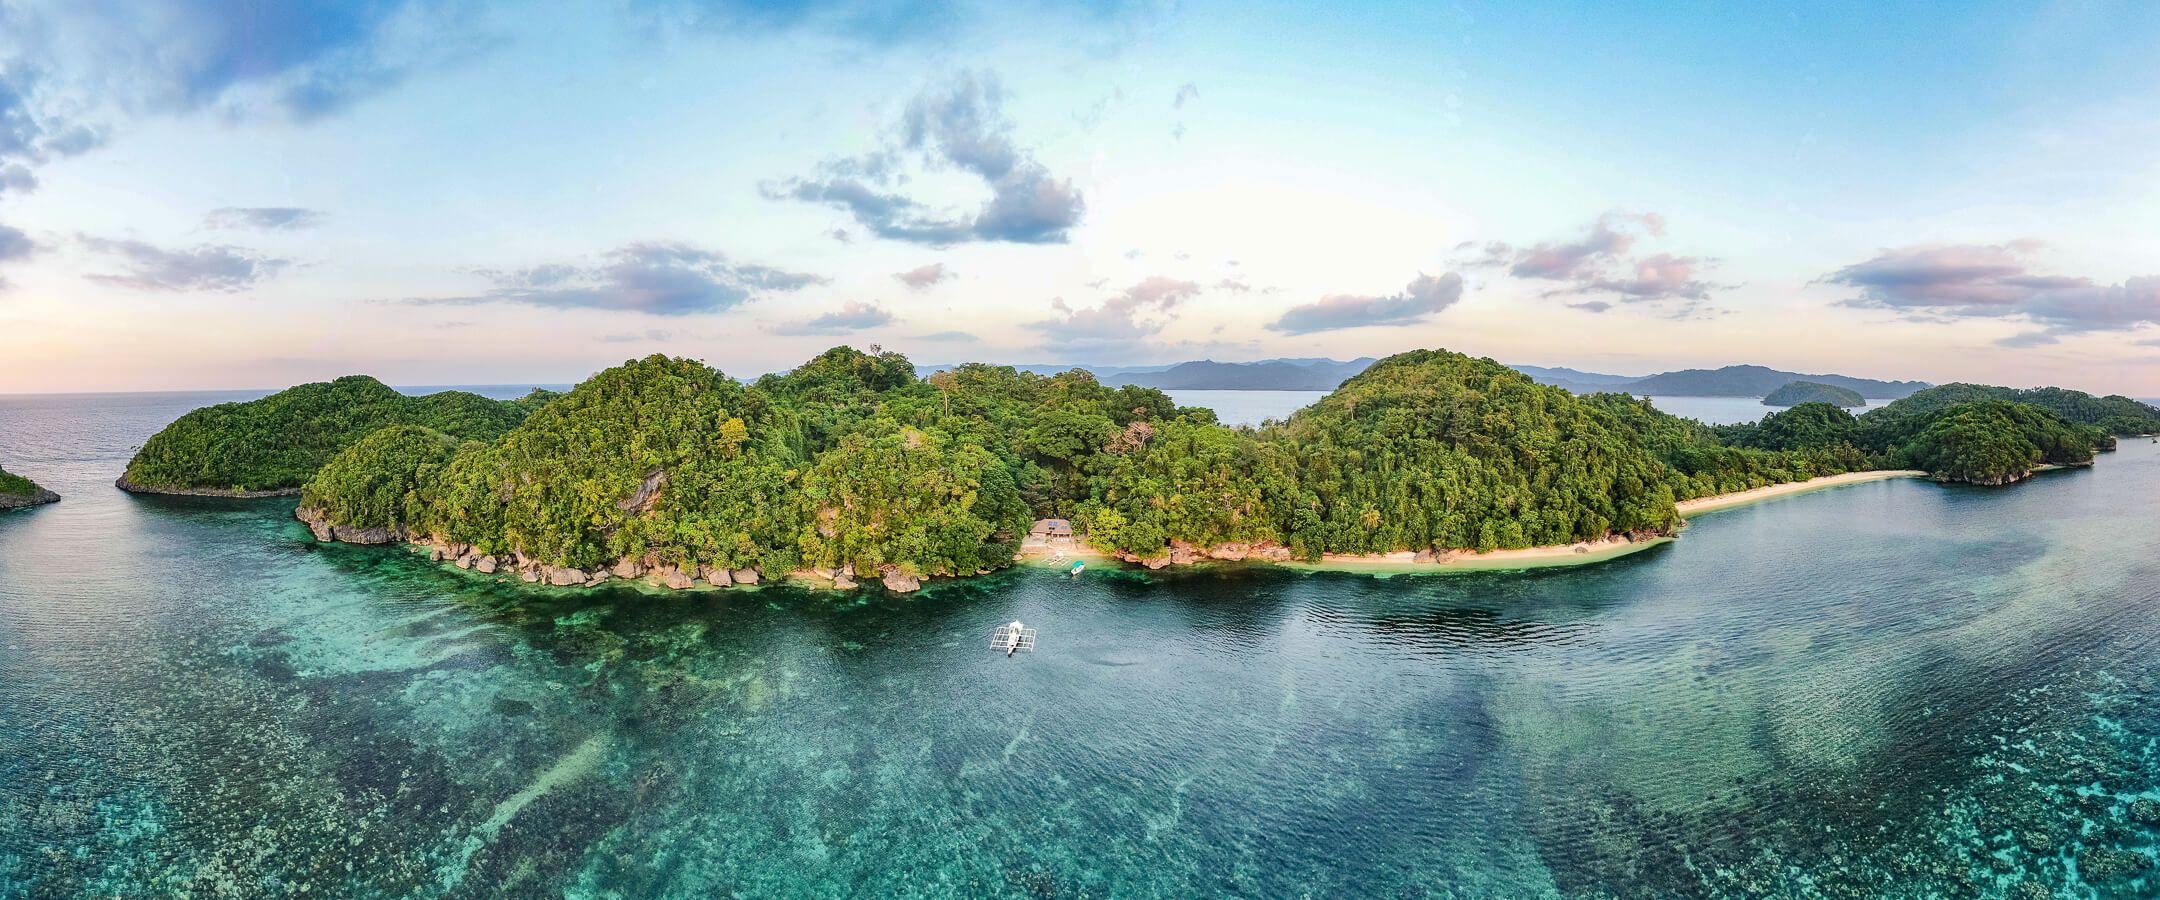 With over 43 hectares of forest and 100 hectares of coral reefs and sea beds, Dangujan island is home to thousands of endemic species.
Photo: Danjugan Archives
